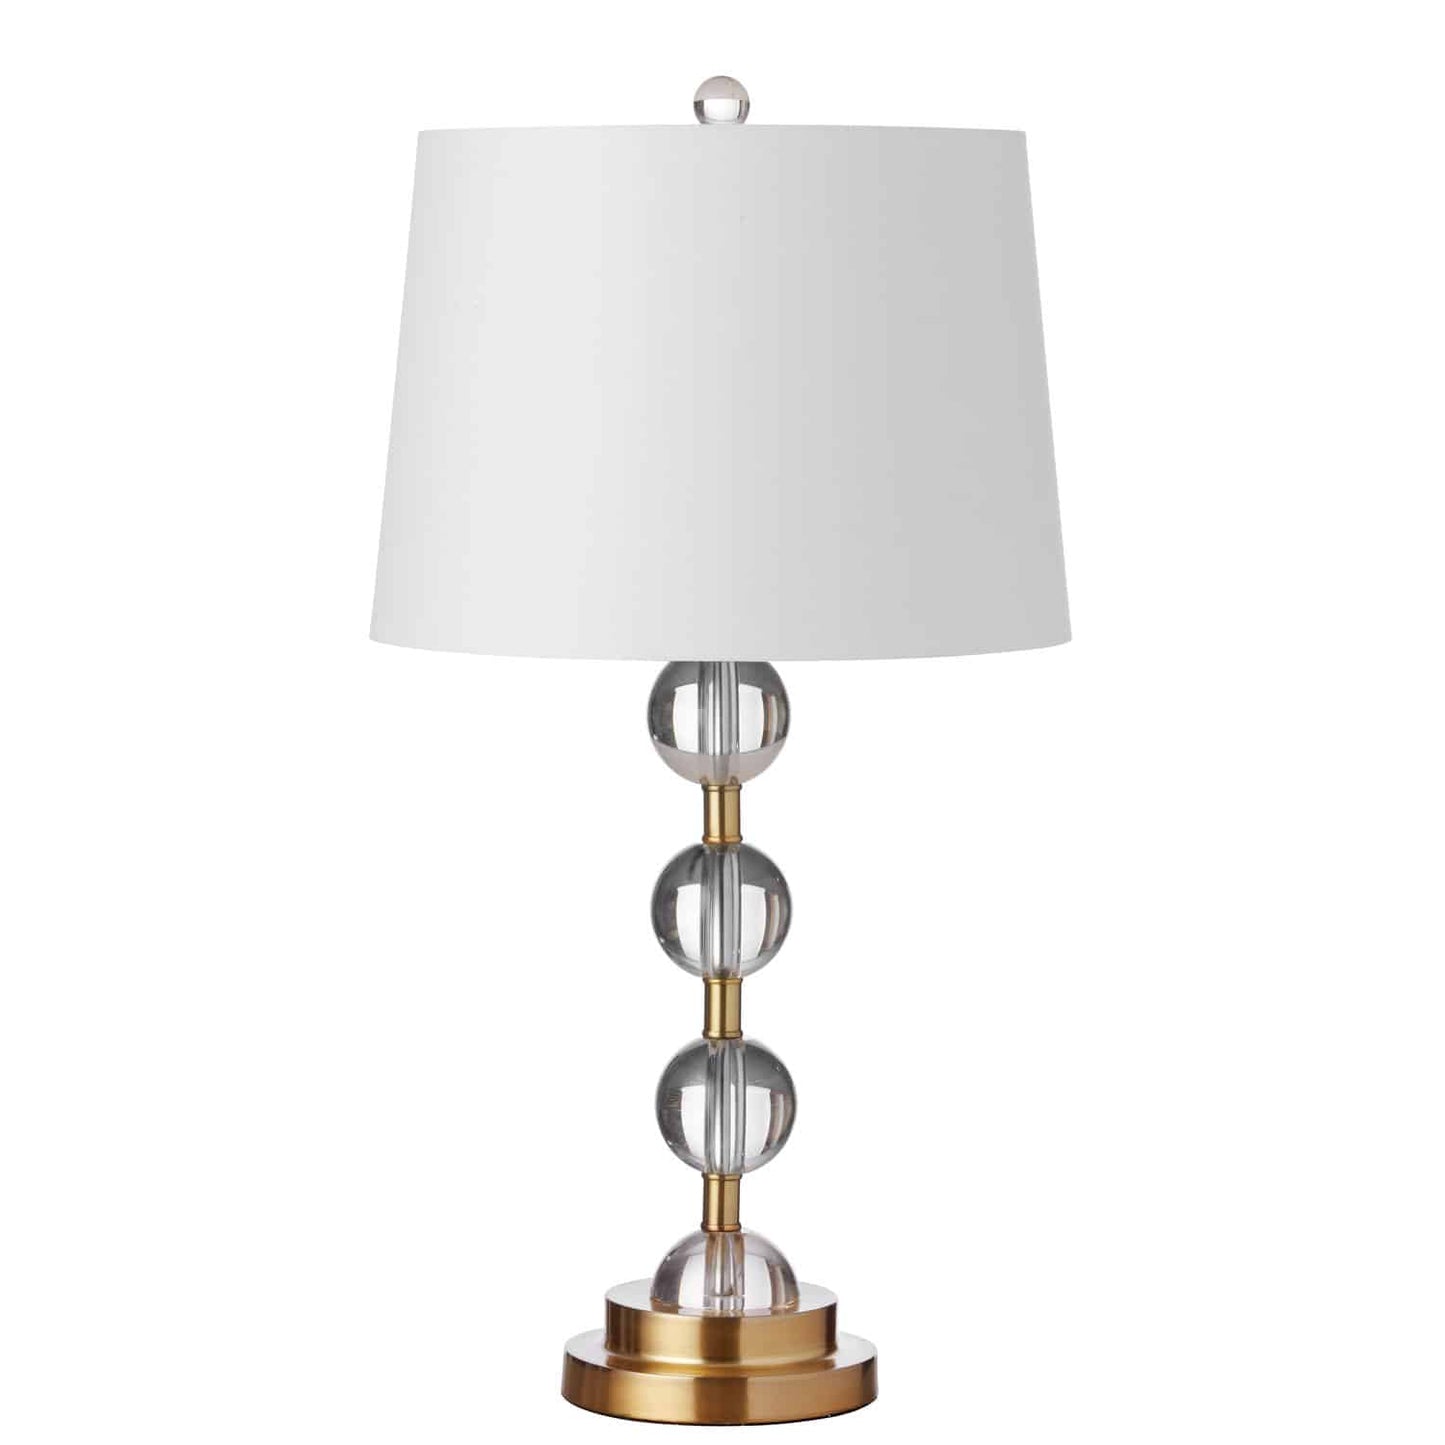 Dainolite C182T-AGB 1 Light Incandescent Crystal Table Lamp Aged Bronze Finish with White Shade